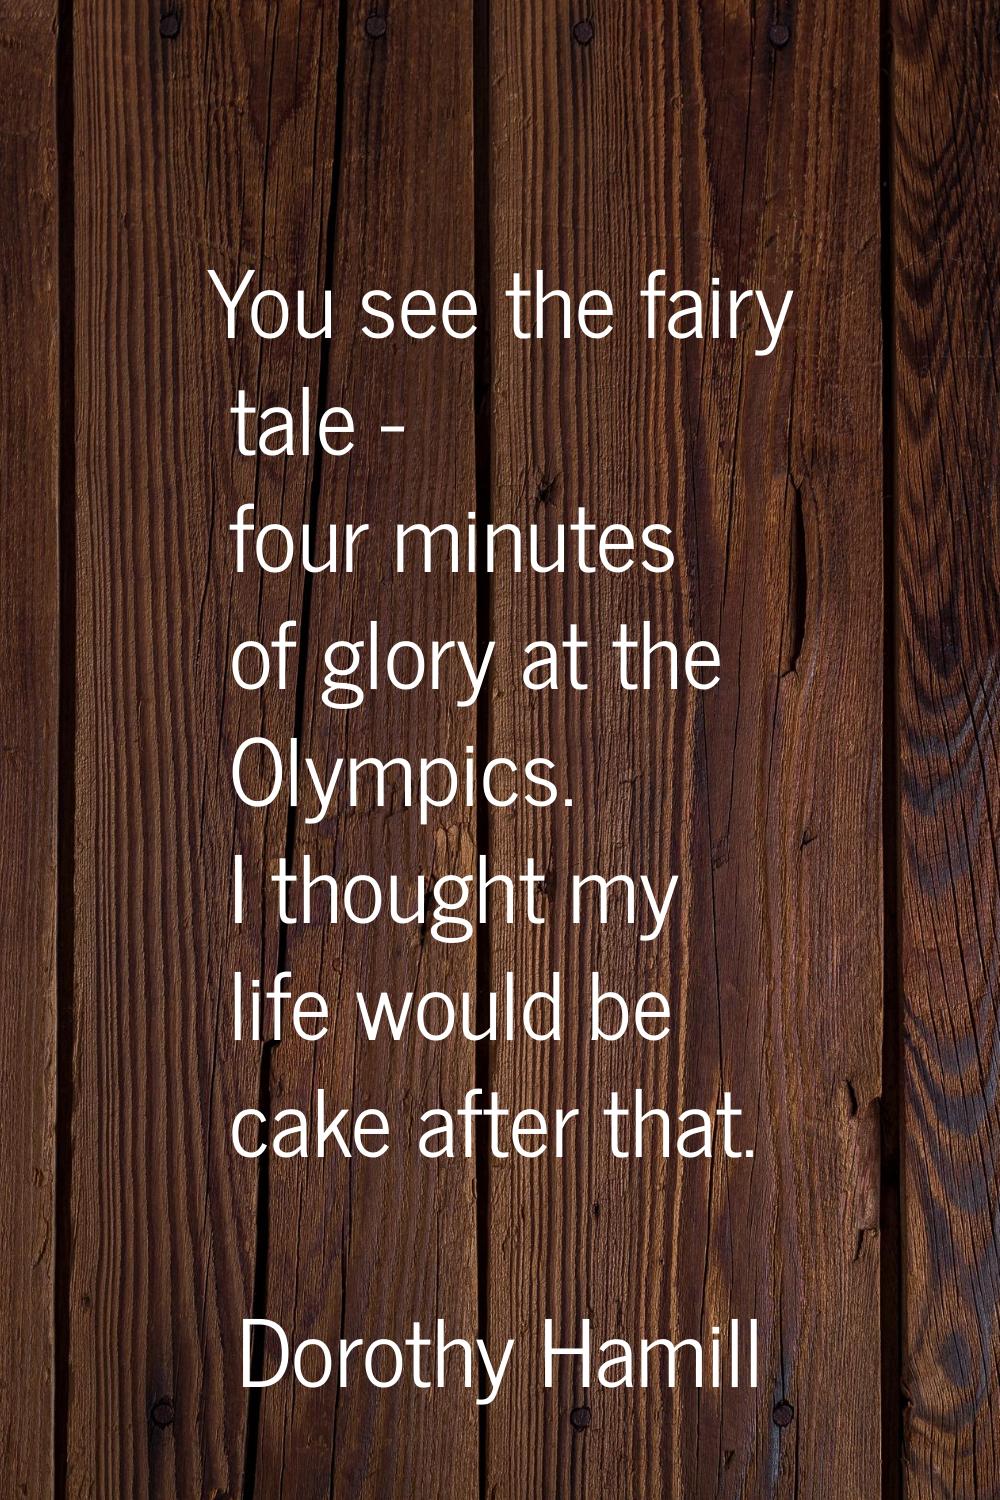 You see the fairy tale - four minutes of glory at the Olympics. I thought my life would be cake aft